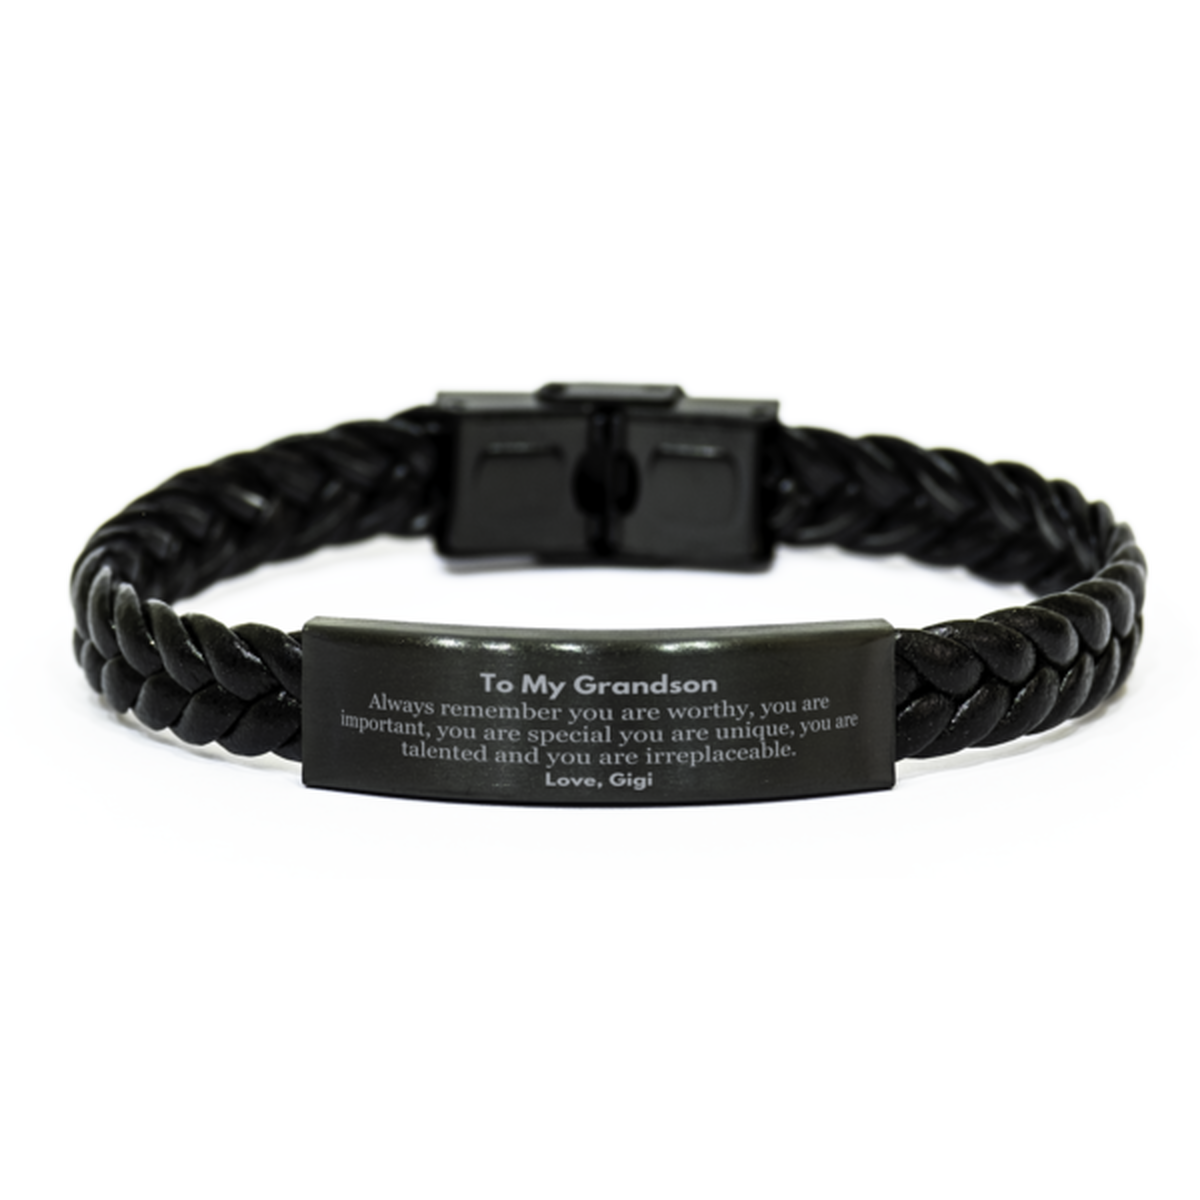 Grandson Birthday Gifts from Gigi, Inspirational Braided Leather Bracelet for Grandson Christmas Graduation Gifts for Grandson Always remember you are worthy, you are important. Love, Gigi